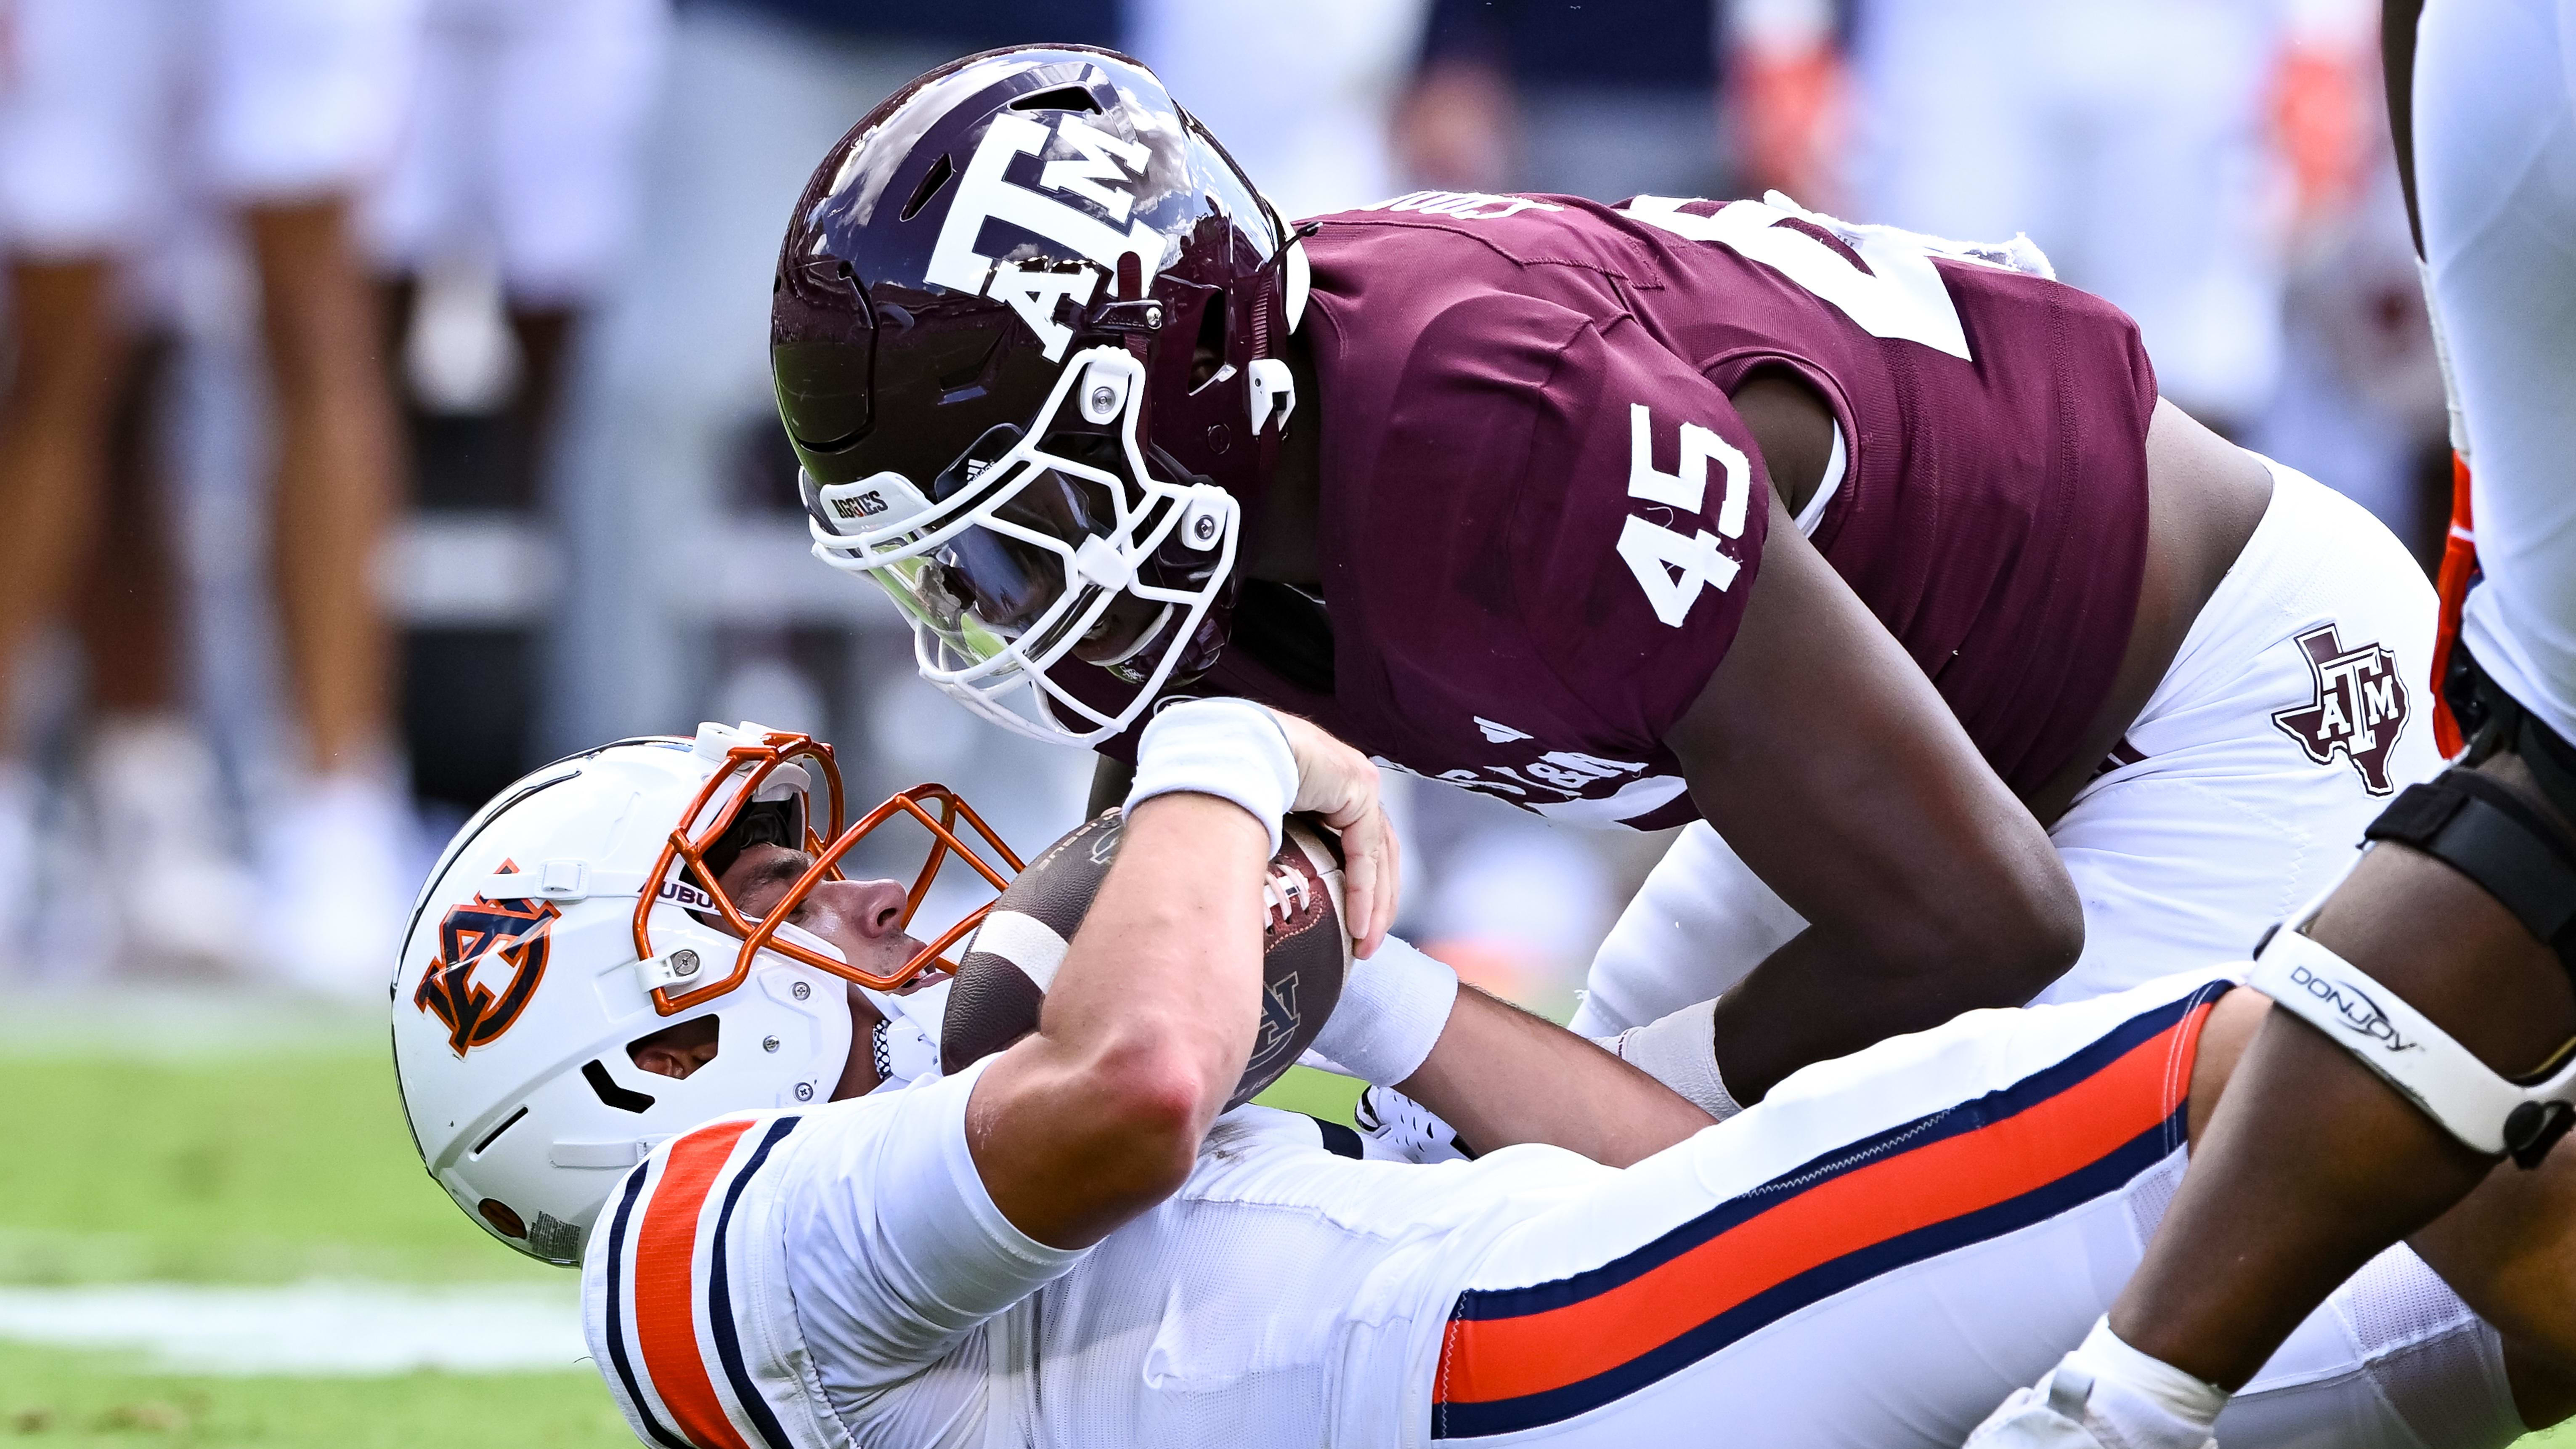 Texas A&M Aggies in the NFL Draft: Where Will They Be Selected?